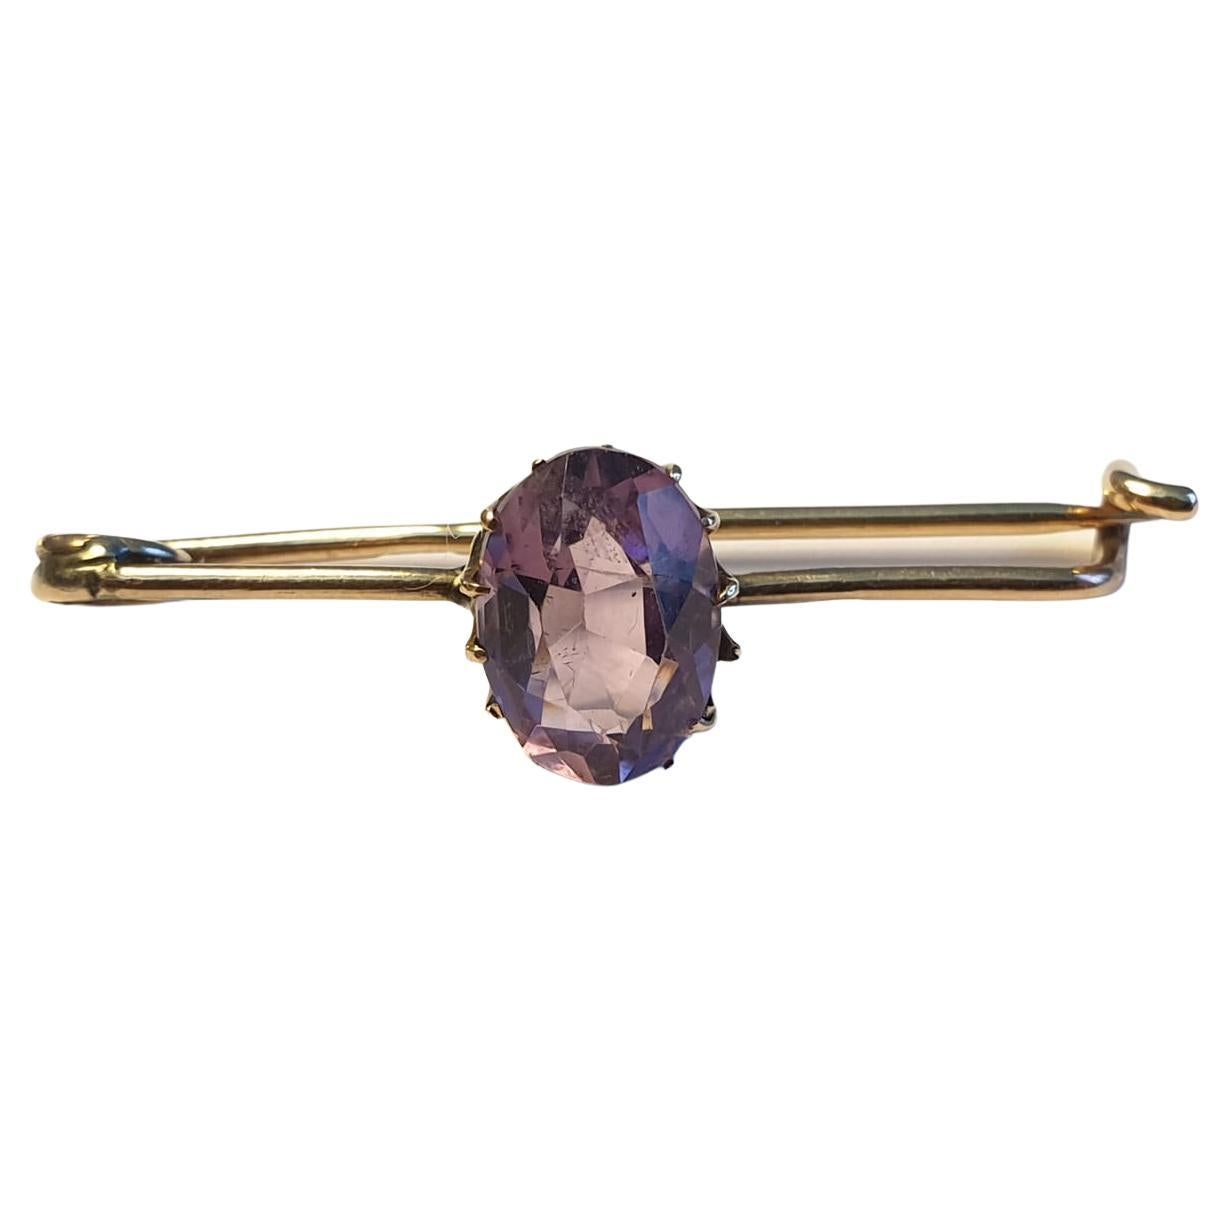 Antique 1880s Siberian Amethyst Russian Gold Brooch For Sale